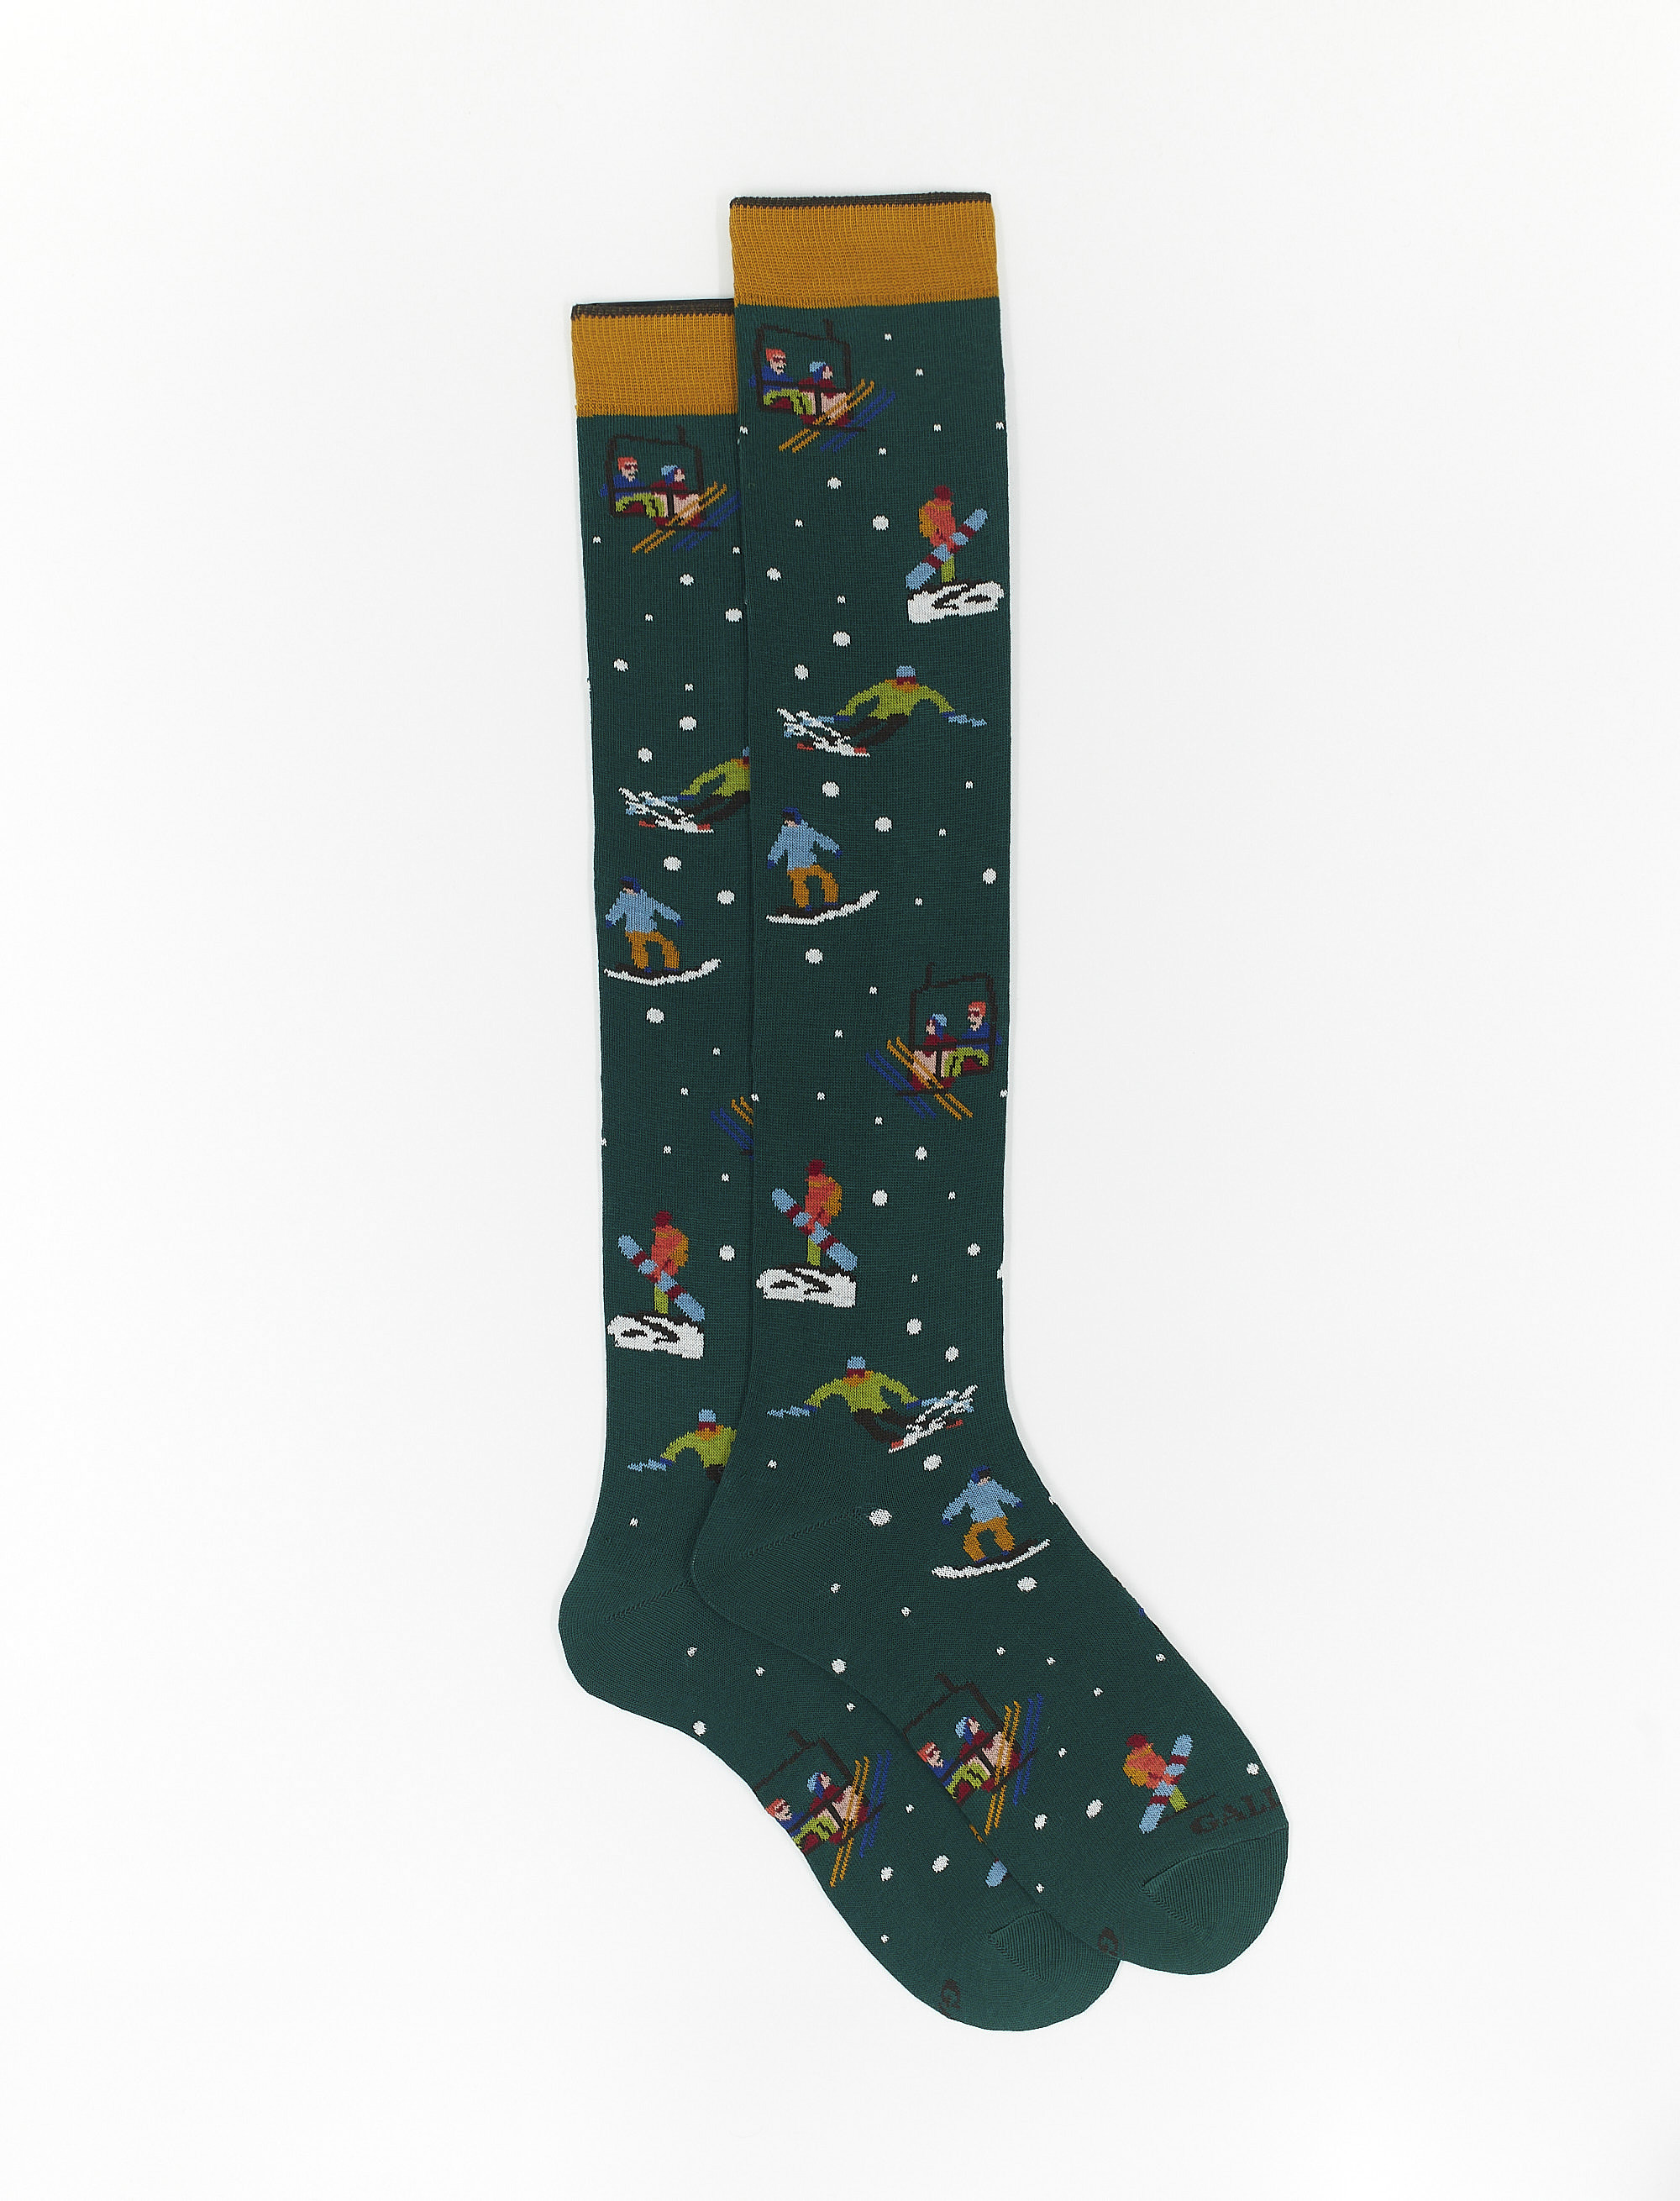 Women's eucalyptus green long cotton socks with skier motif - The FW Edition | Gallo 1927 - Official Online Shop